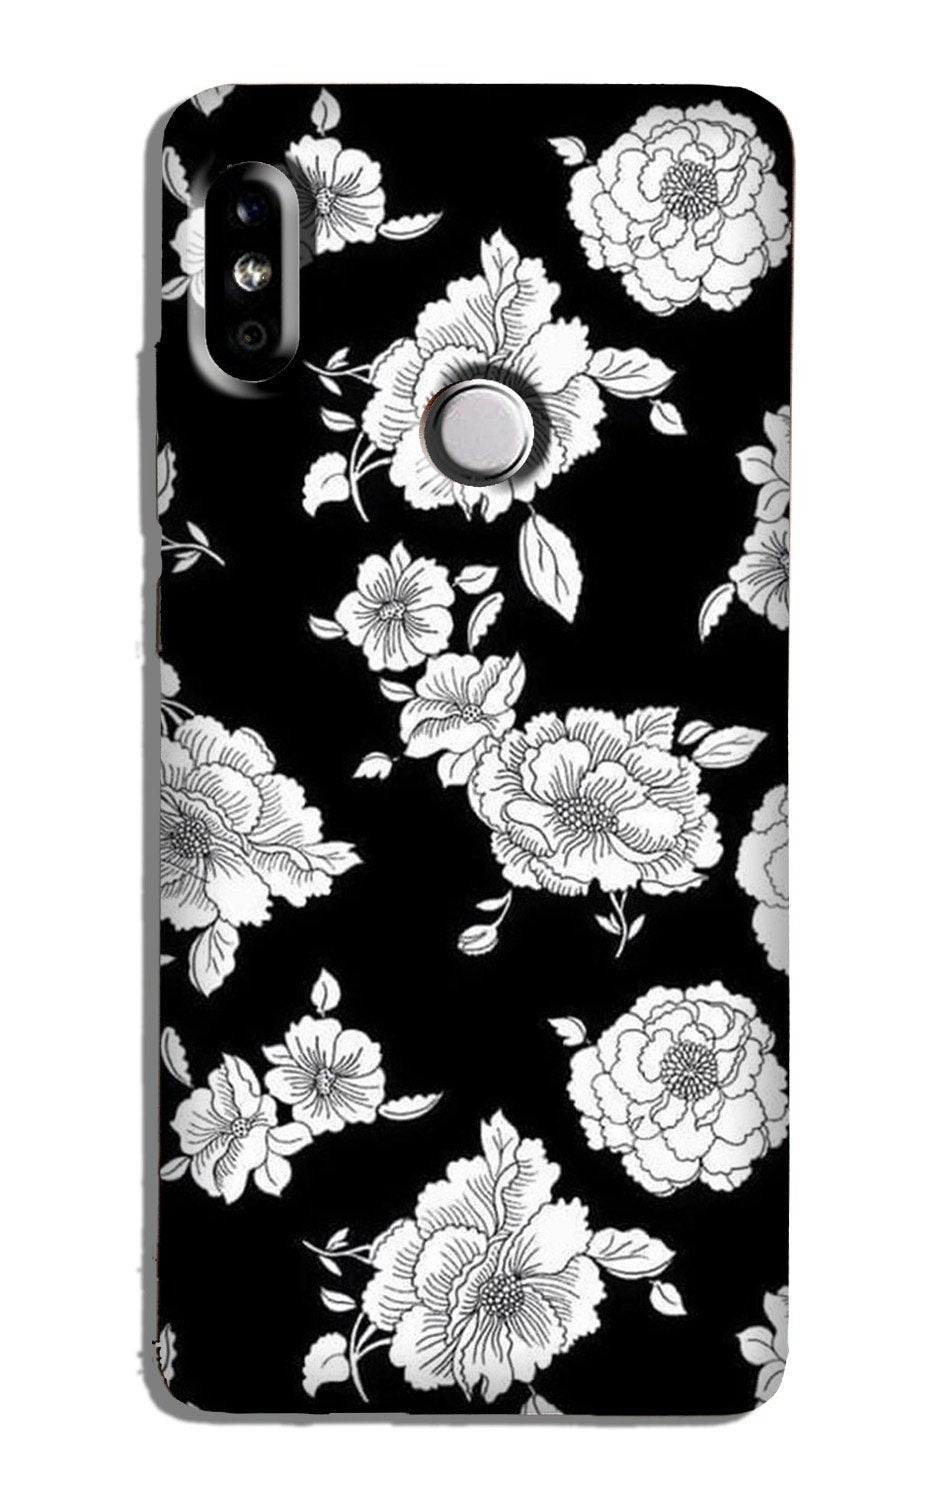 White flowers Black Background Case for Redmi Note 5 Pro